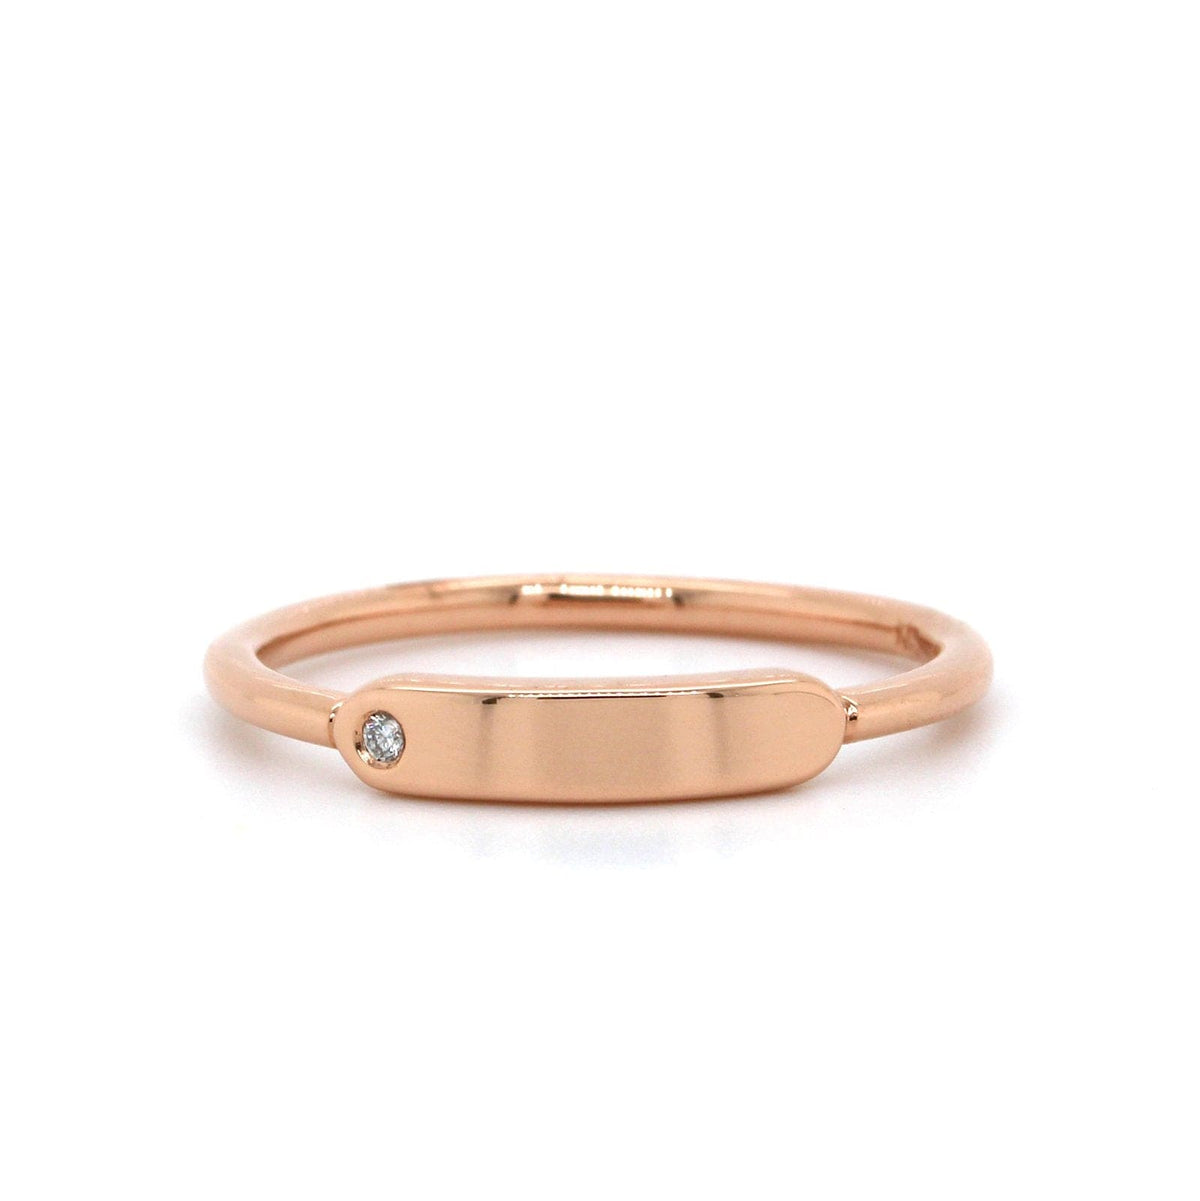 The Twiggy 14K Rose Gold Engravable Diamond Bar Ring, 14K Rose Gold, Long's Jewelers